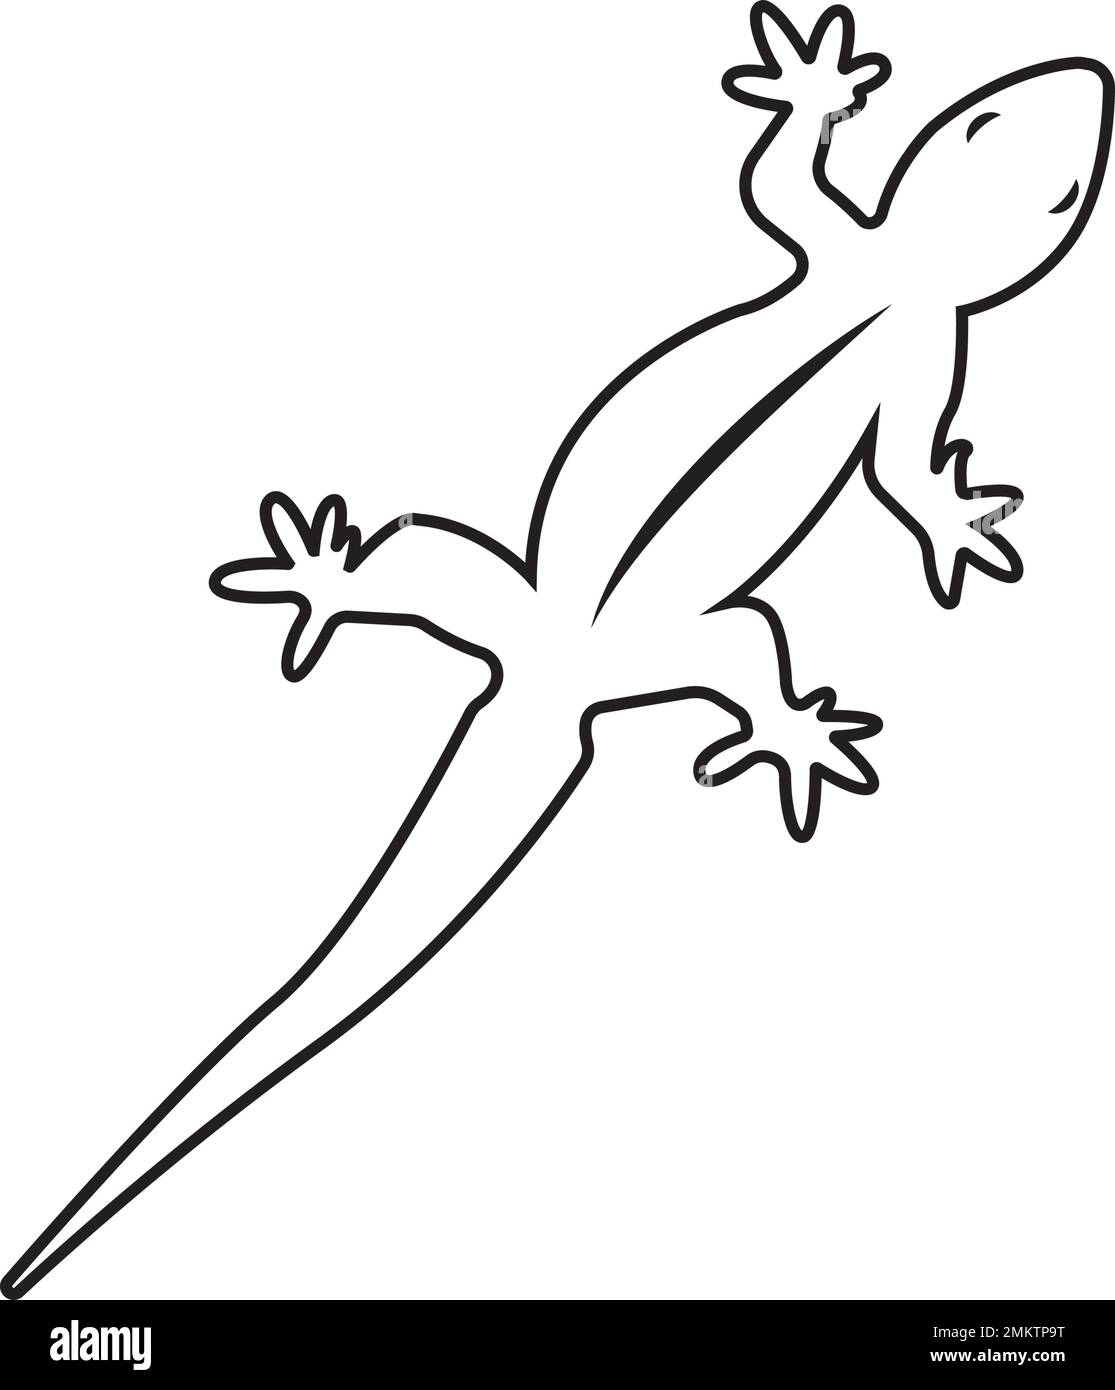 How To Draw A Lizard,Chipkali Very Simple step - YouTube